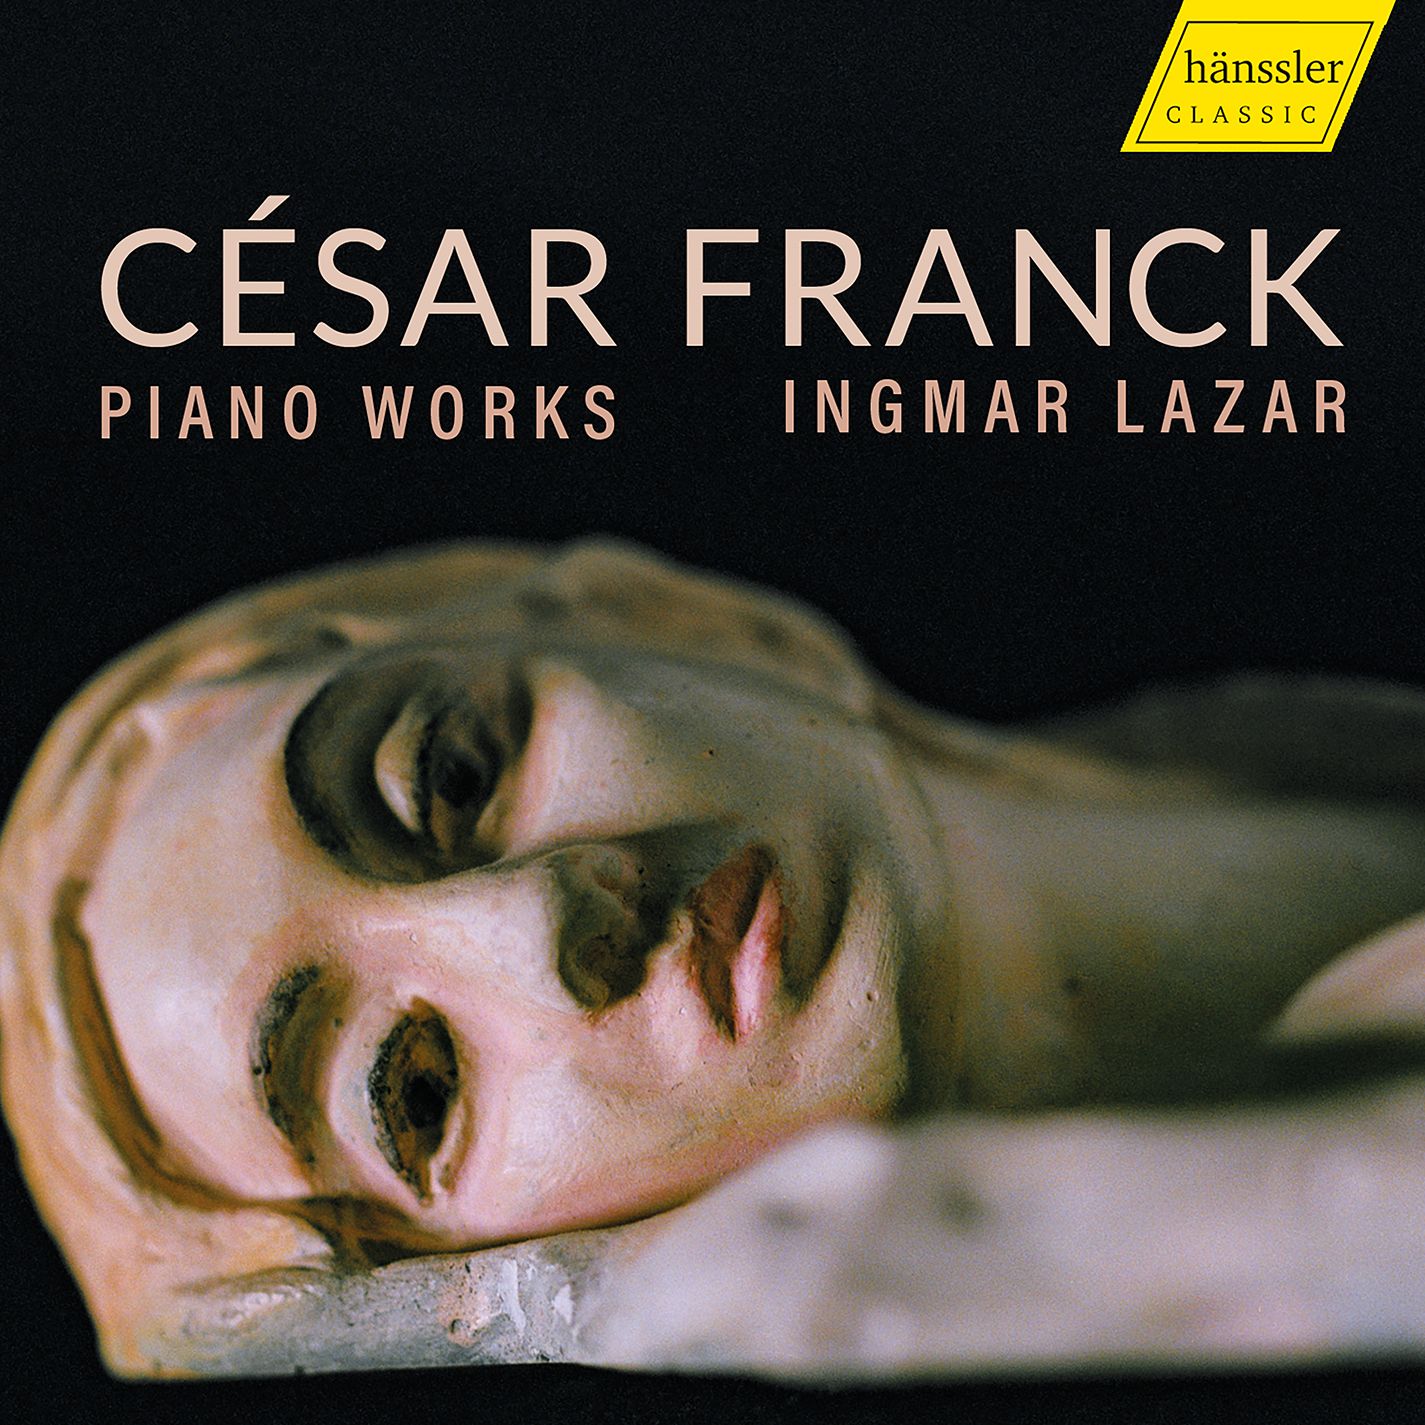 The Piano Music of César Franck